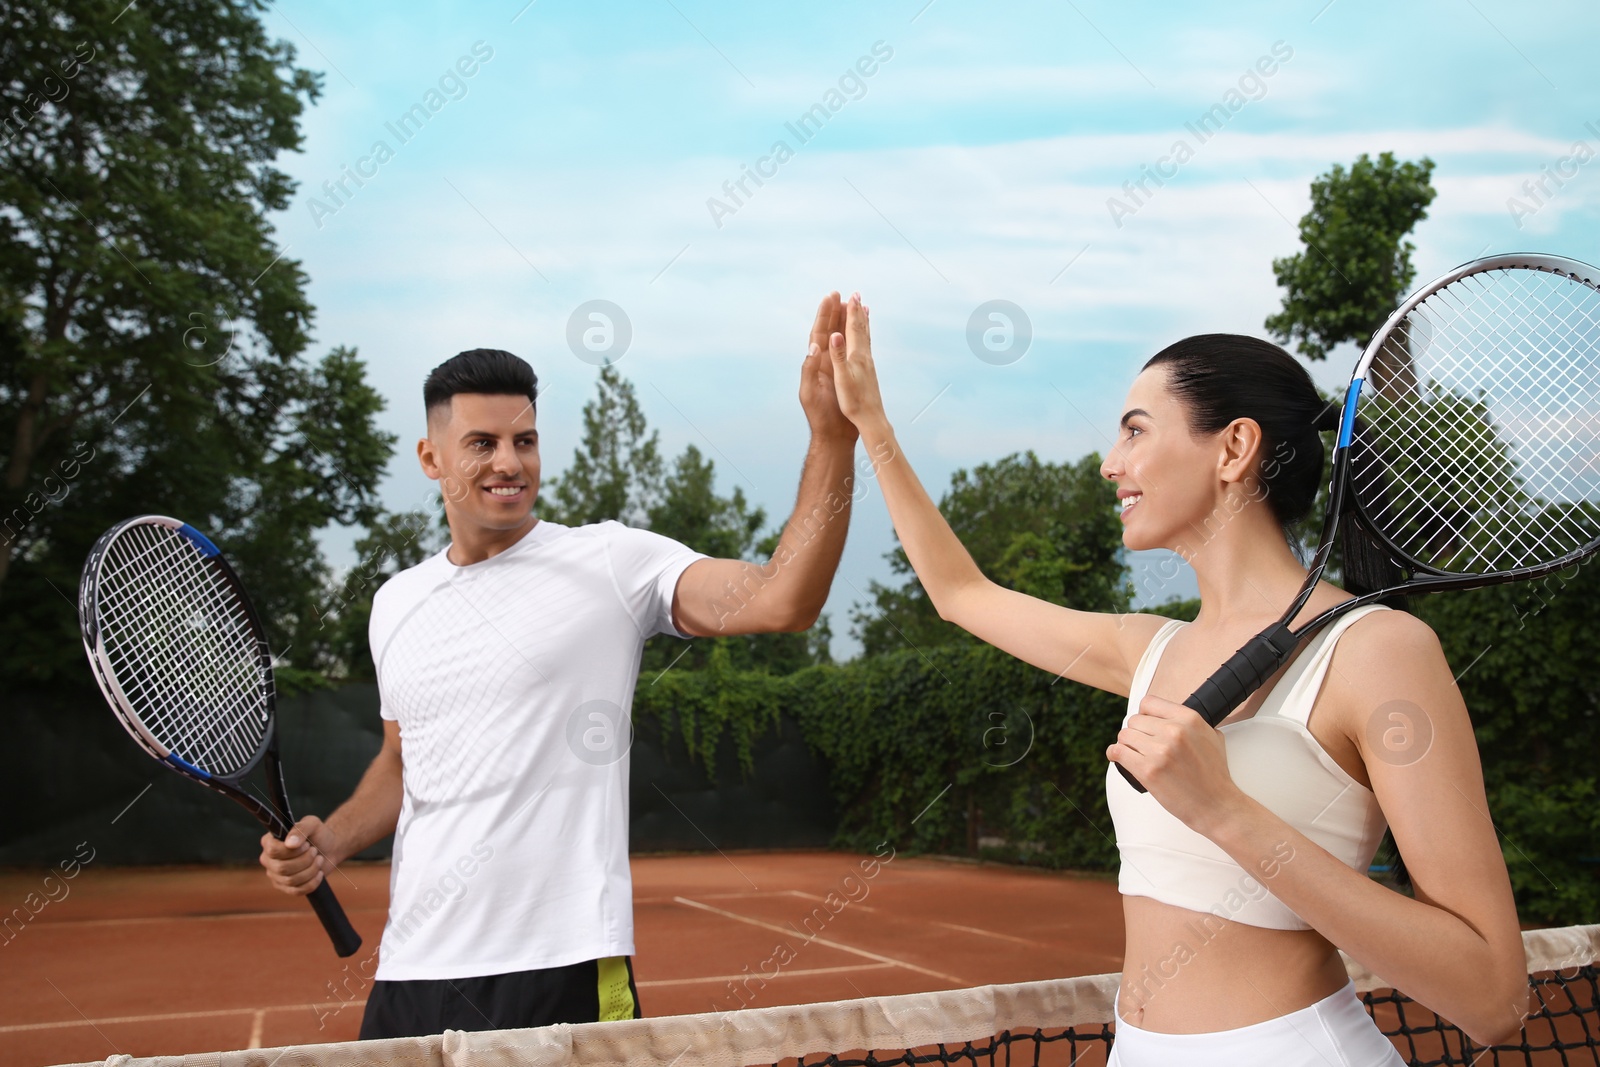 Photo of Woman giving man high five at tennis court